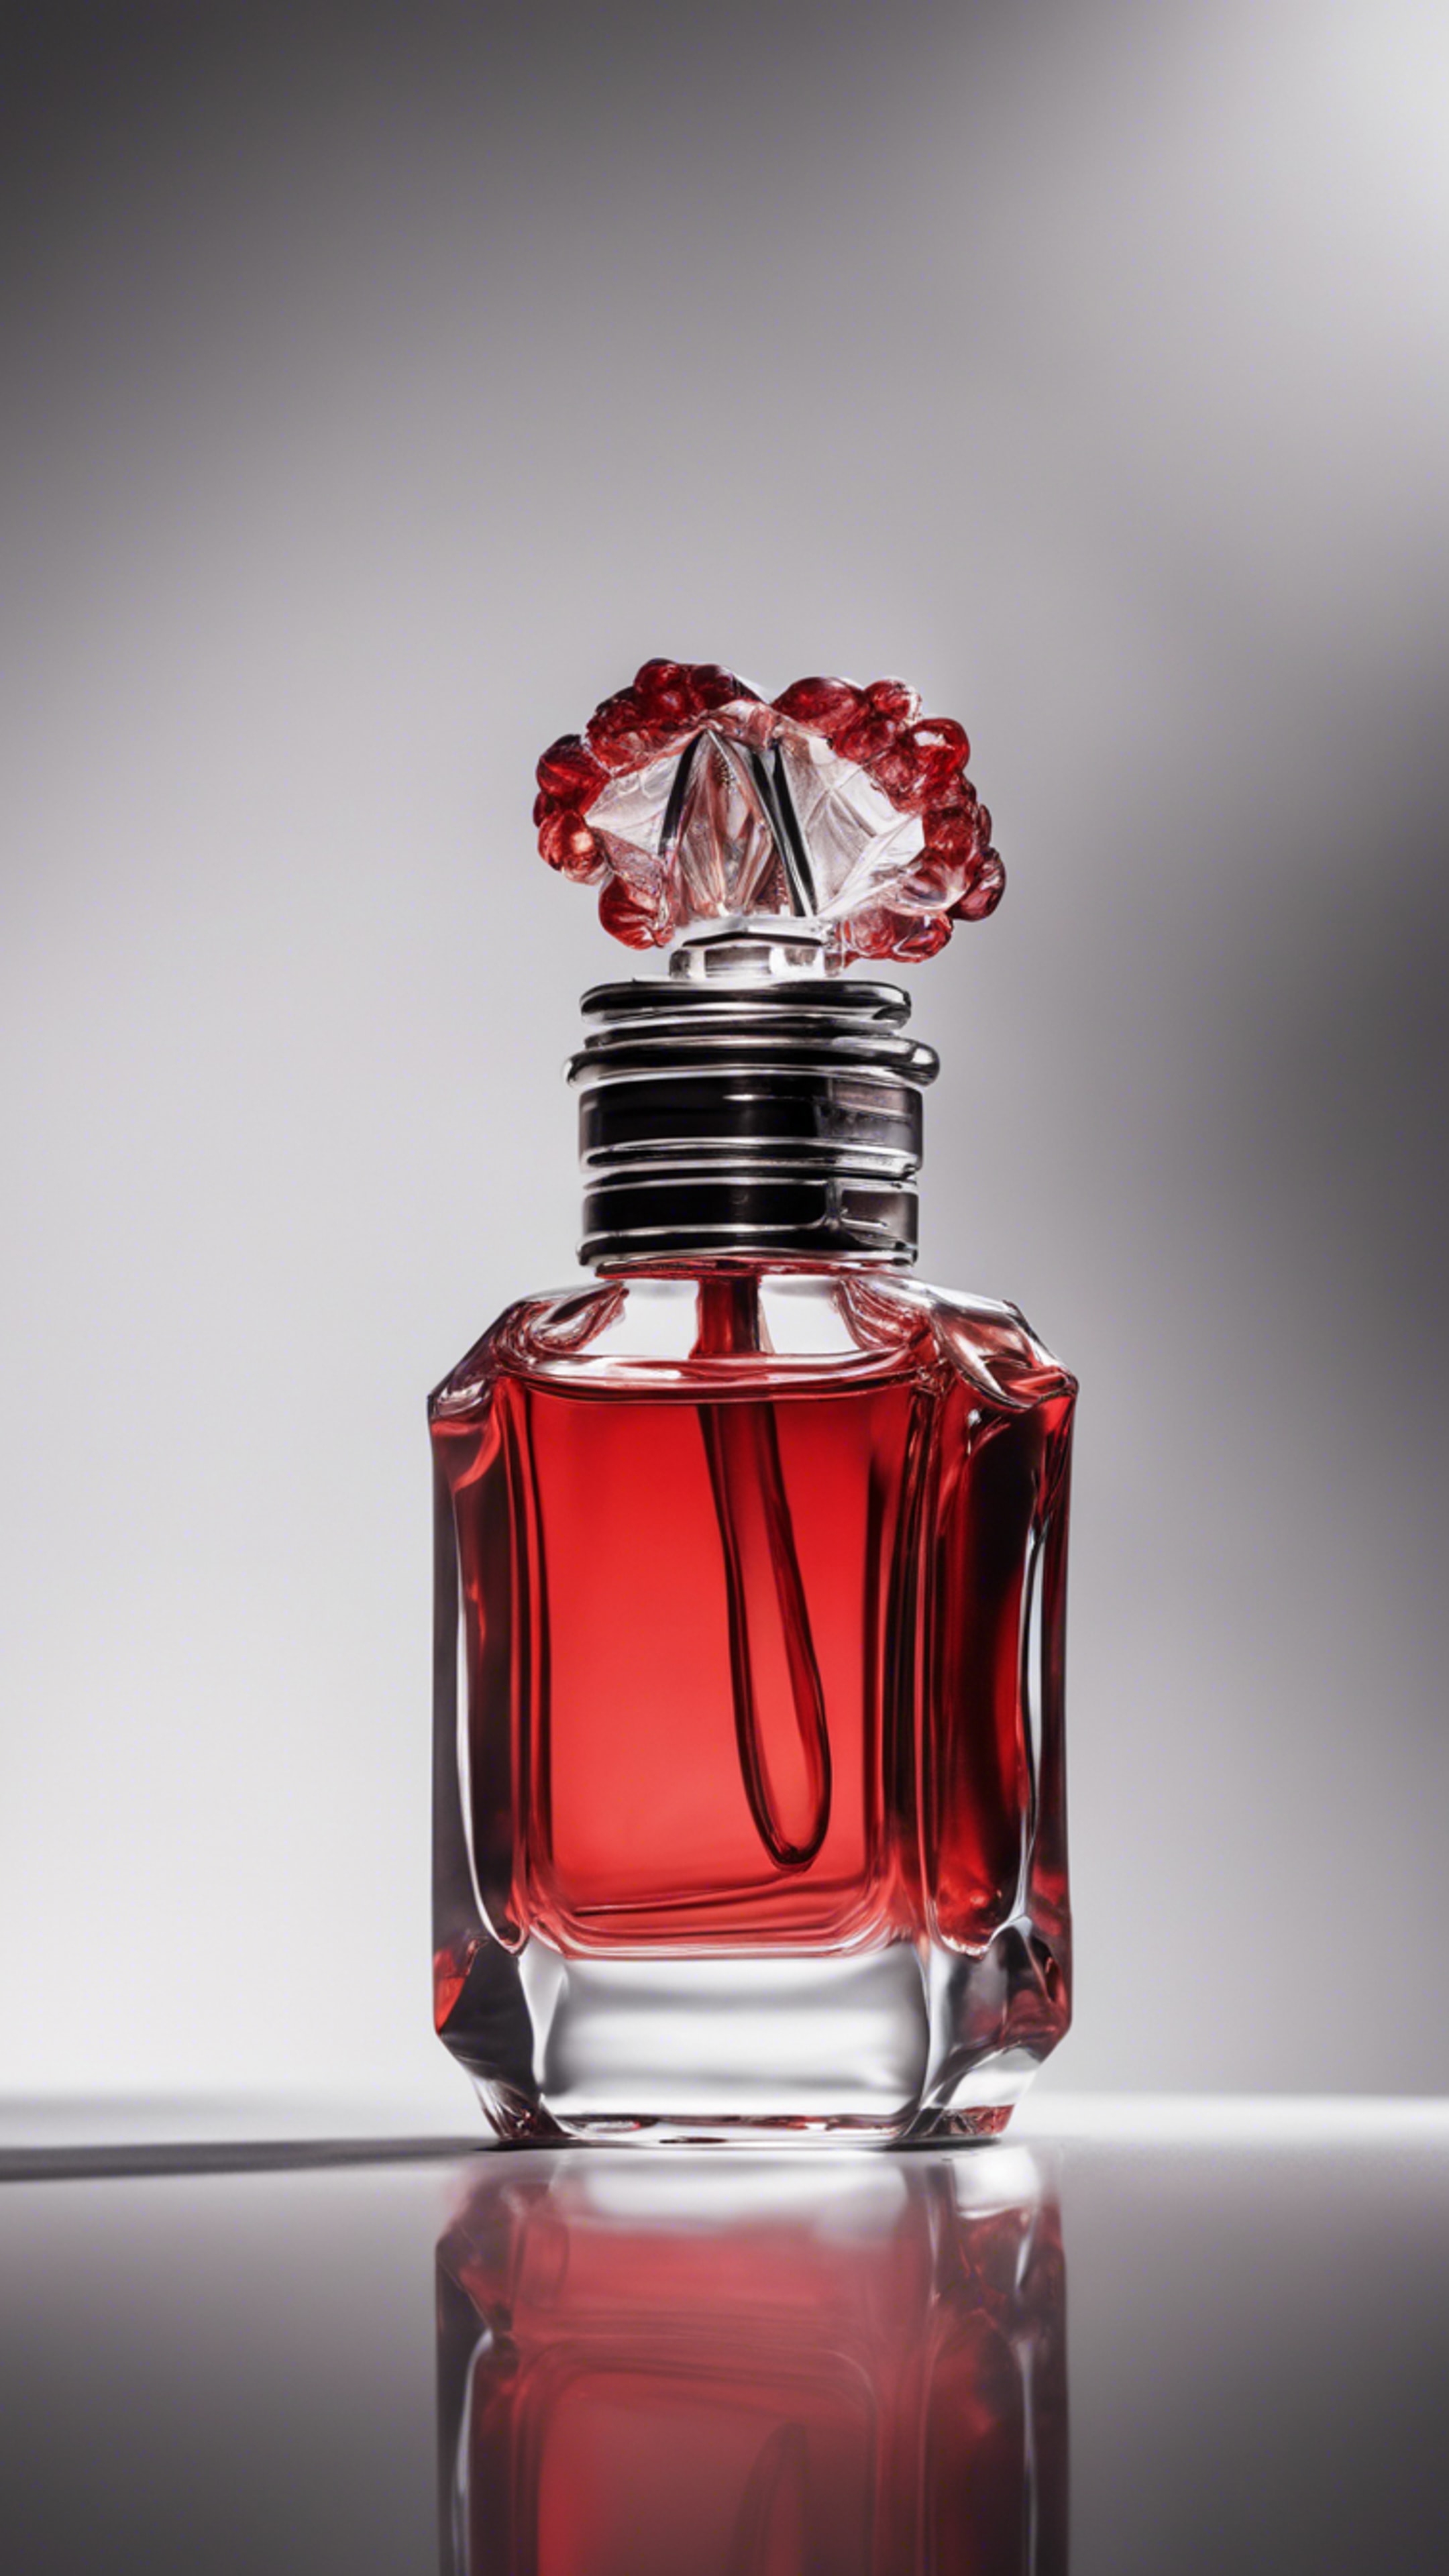 The portrait of a sassy red perfume bottle clashing against a pure white backdrop. Tapet[8445b62606744831bb5a]